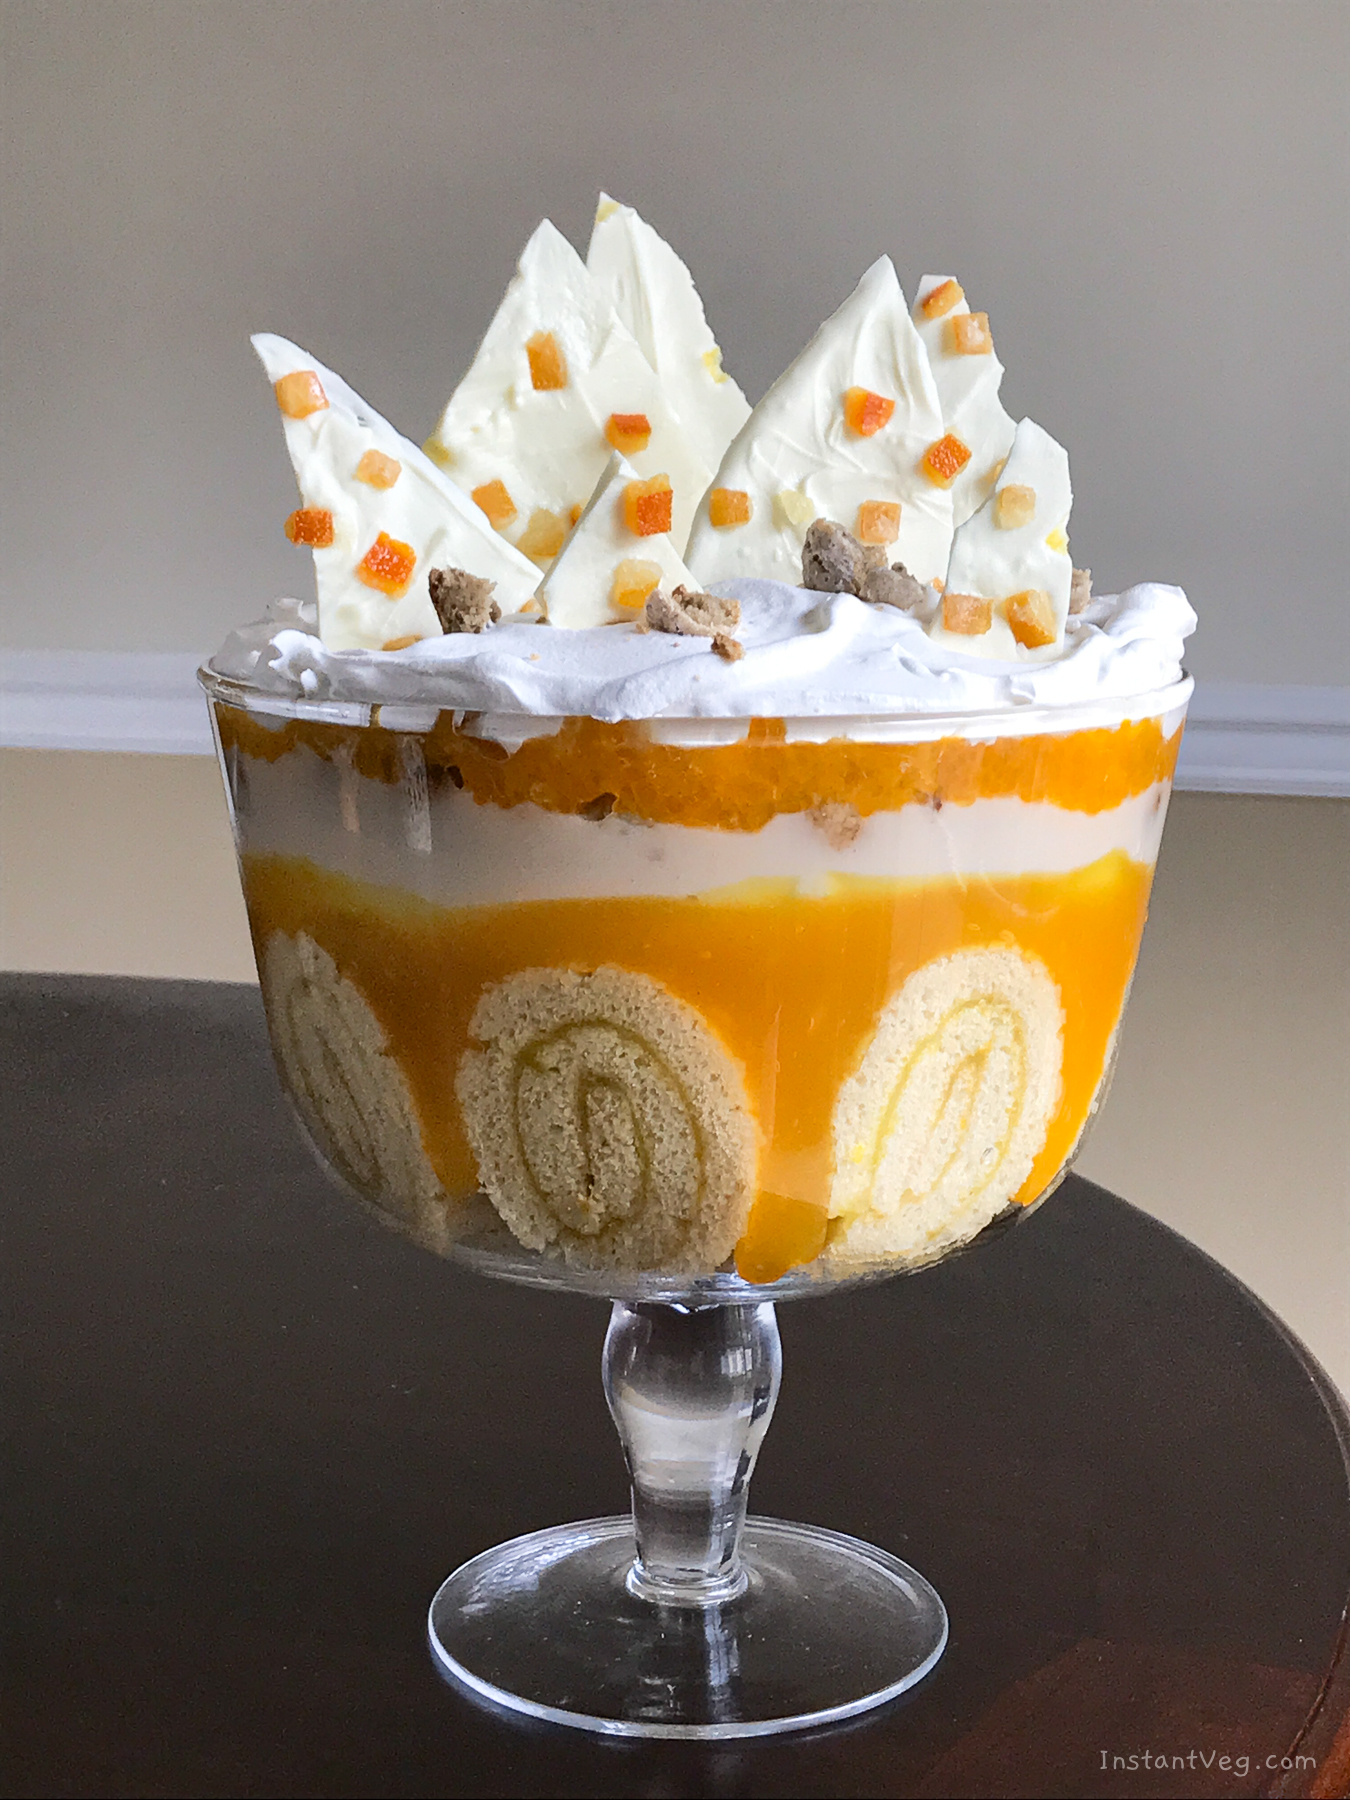 A large glass trifle dish filled with roll cake, orange and white colored layers with pointed shards of almond bark at top.